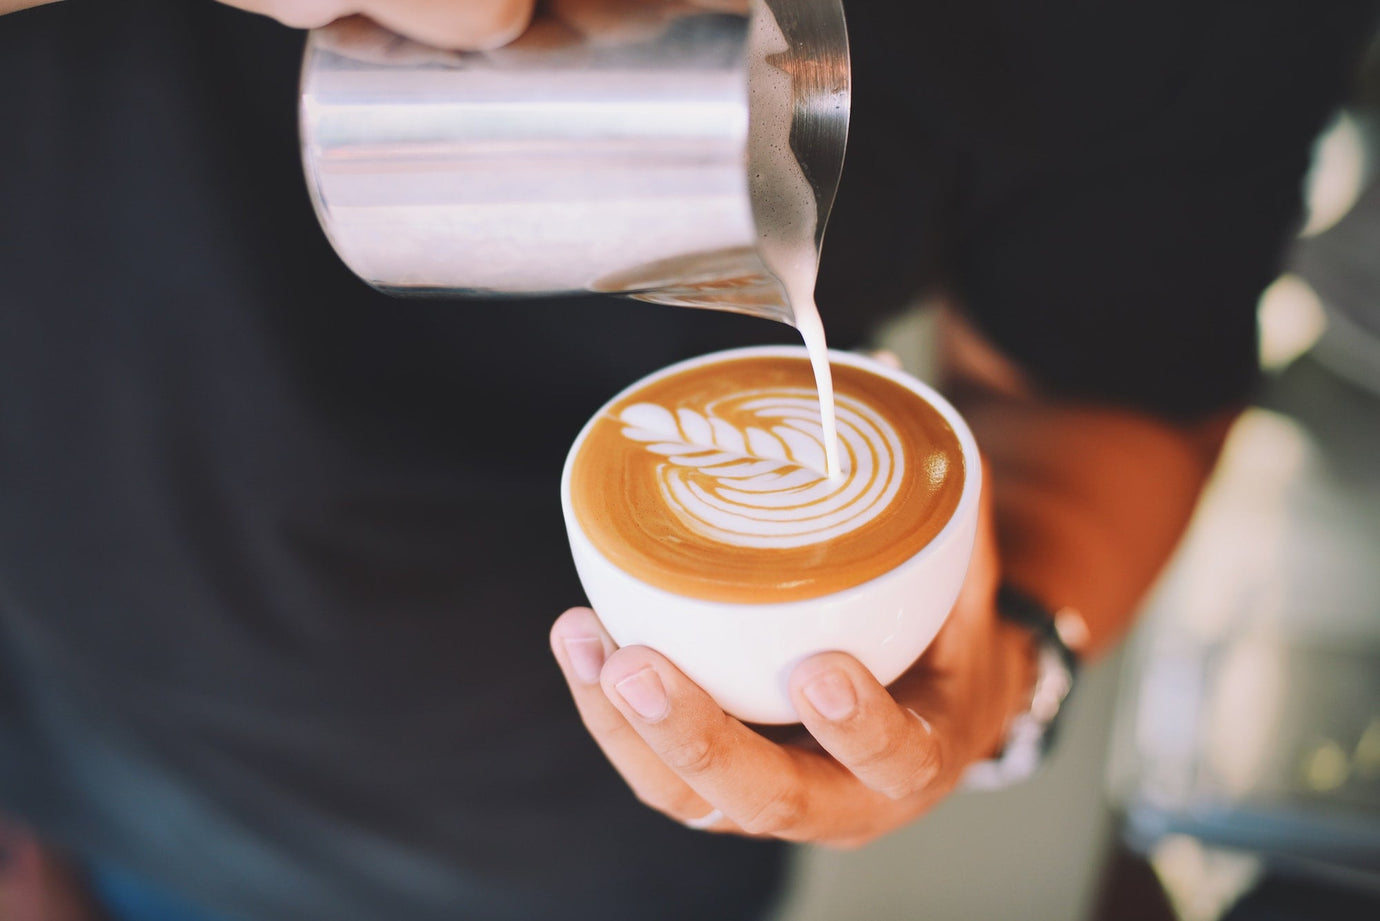 What is milk doing to your coffee?